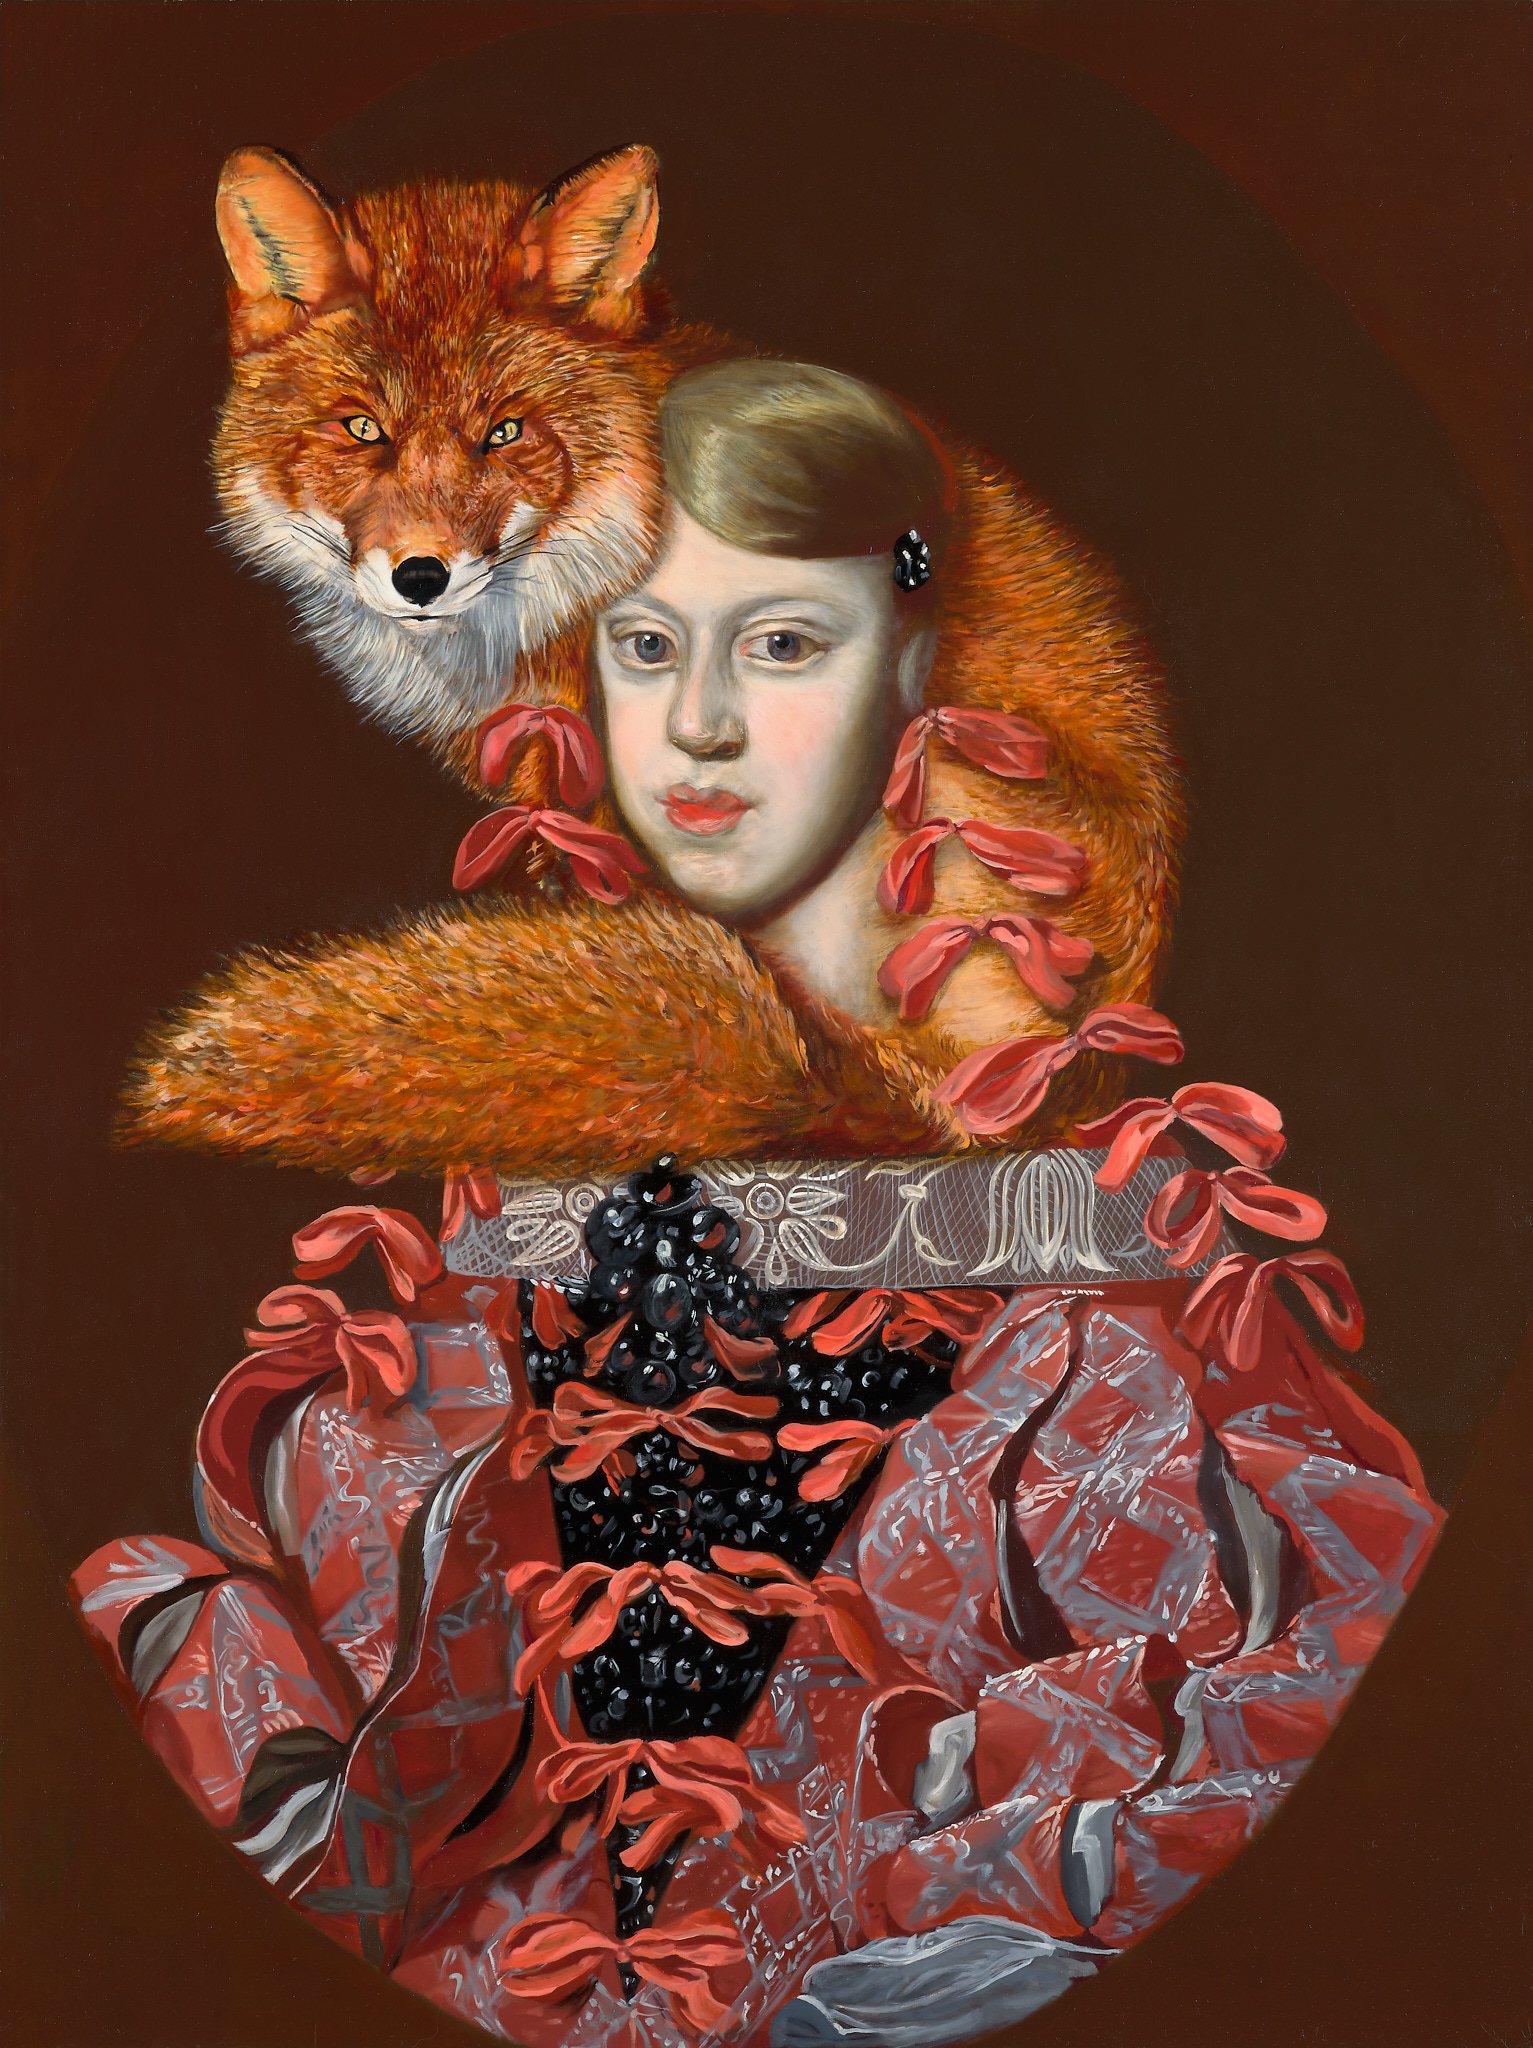    Red Fox Shields and Warms Margarita Theresa Where her Dress is Off Duty    oil on linen  22 x 31.5 inches  2021    &nbsp;  Winter is almost over in Vienna. The growing warmth draws Margarita Theresa outside just as I am drawing her out of her shel